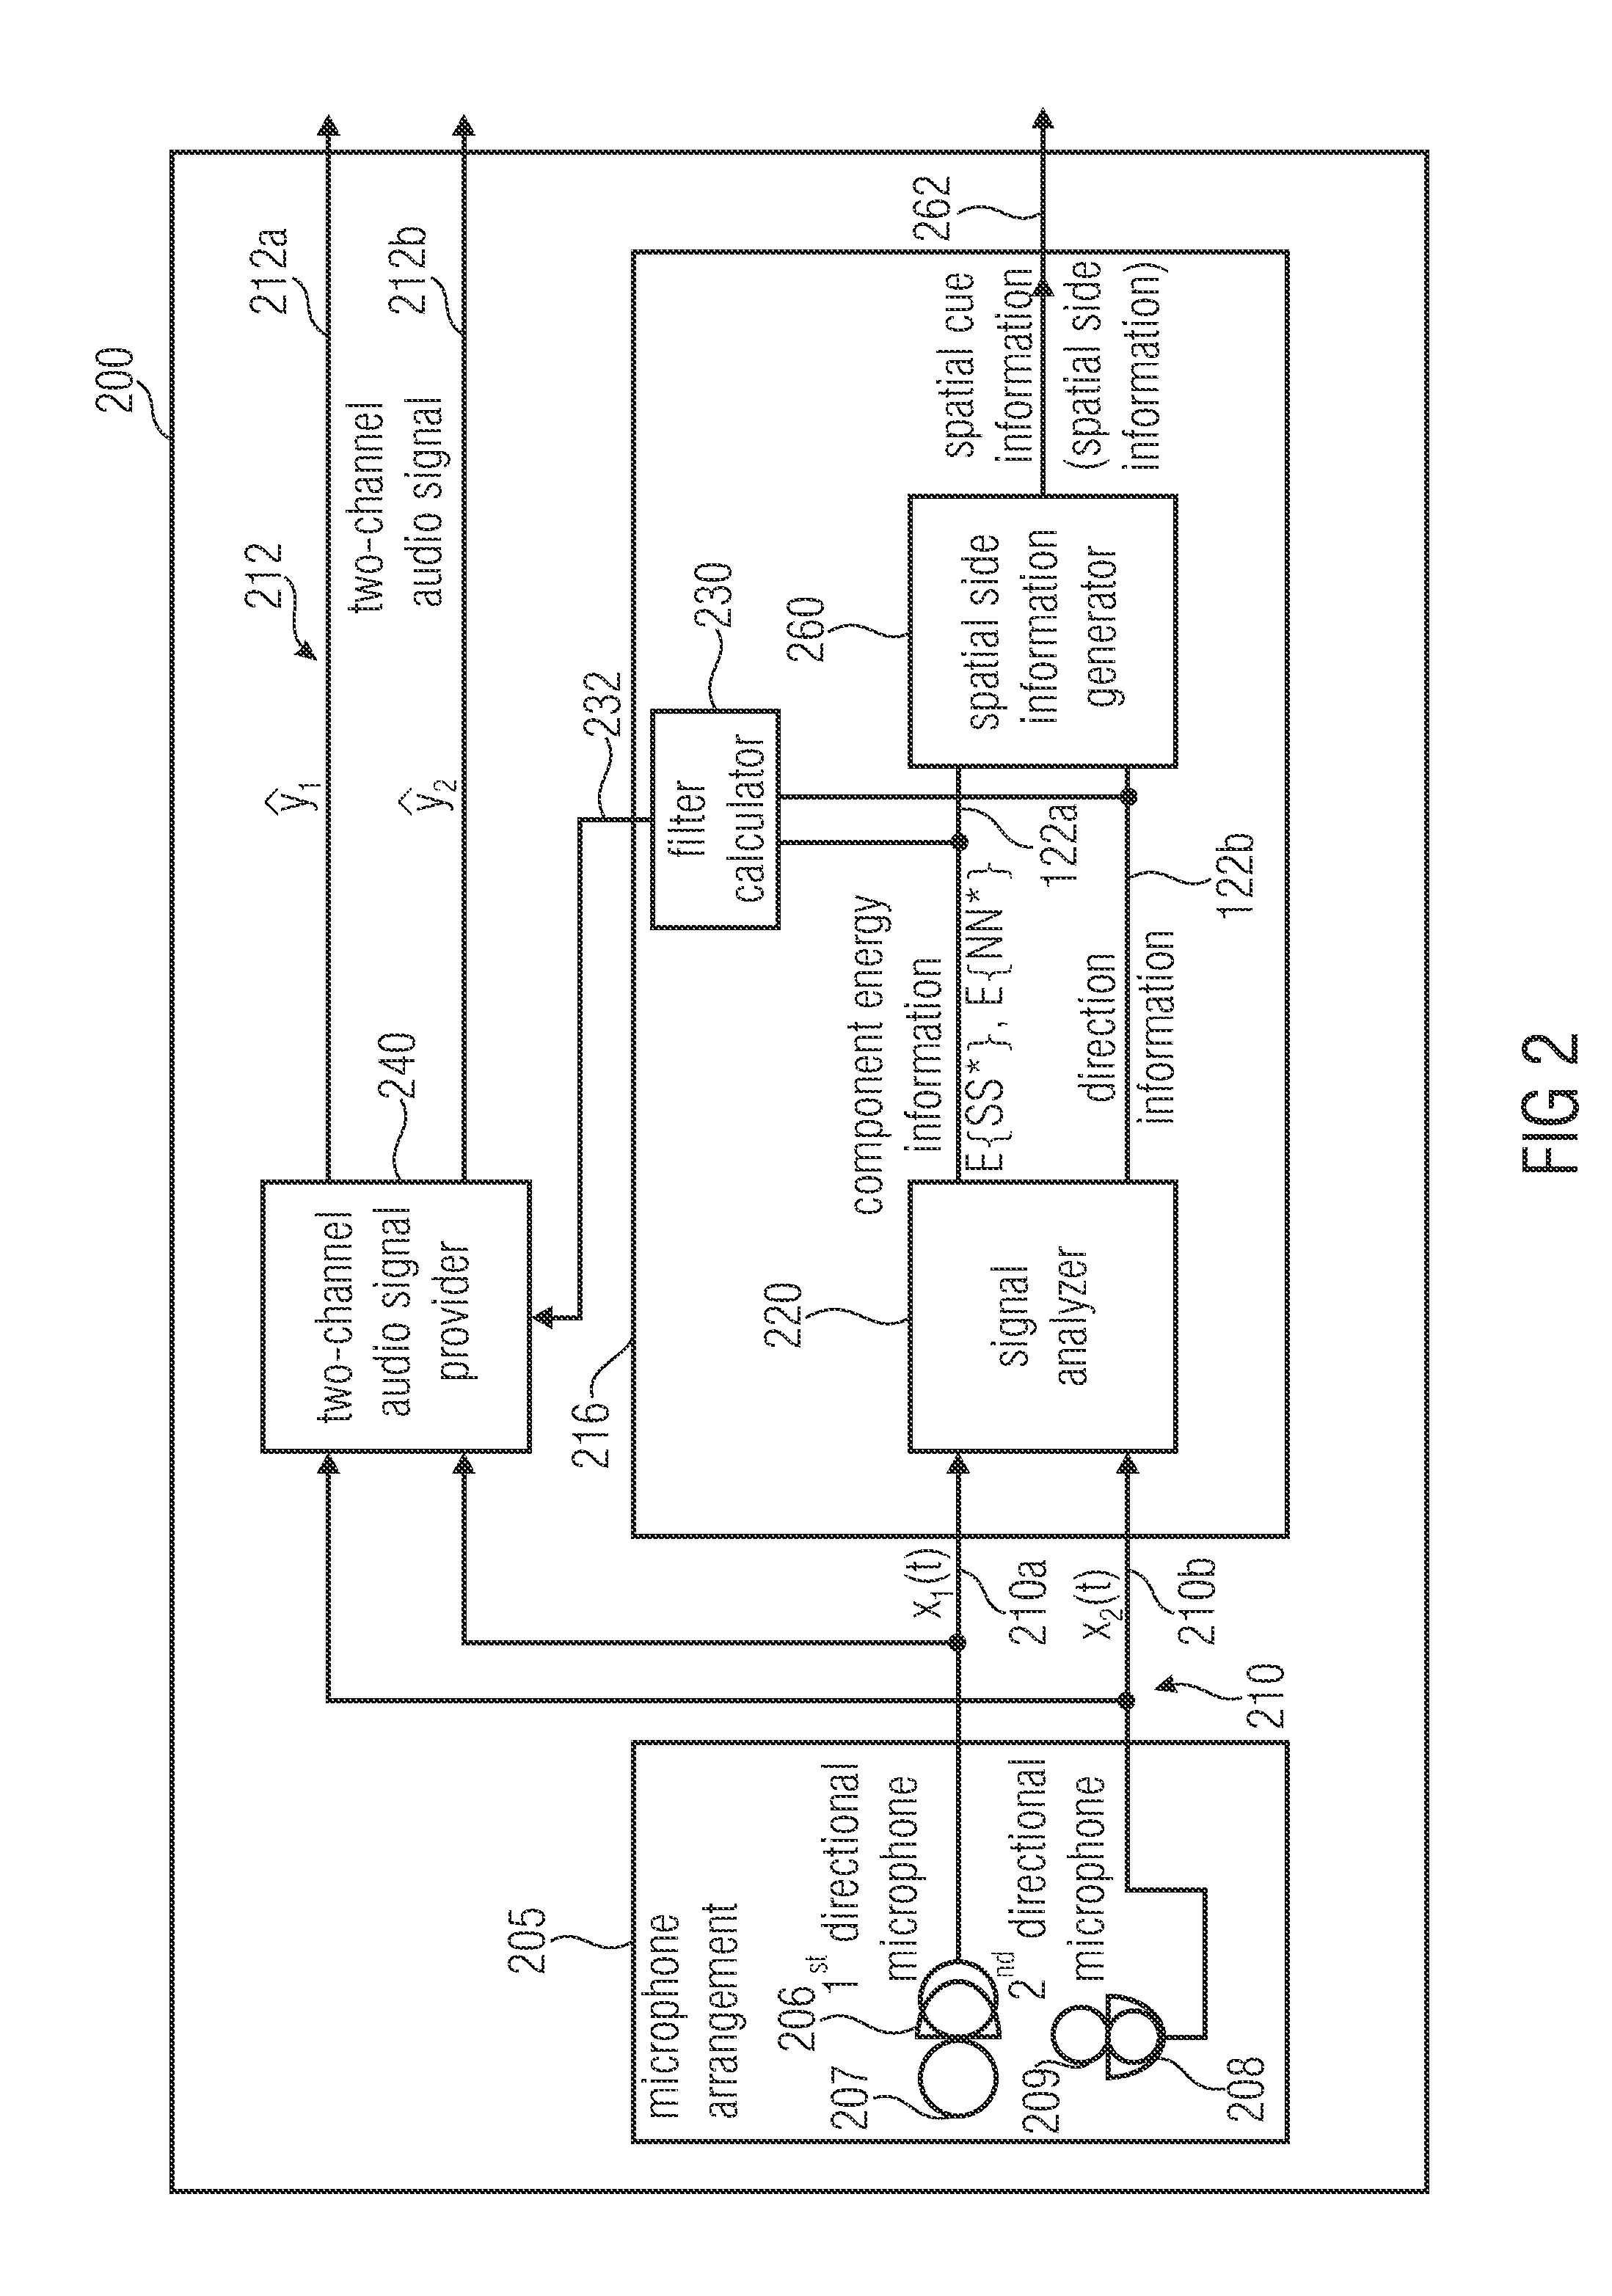 Apparatus for generating an enhanced downmix signal, method for generating an enhanced downmix signal and computer program